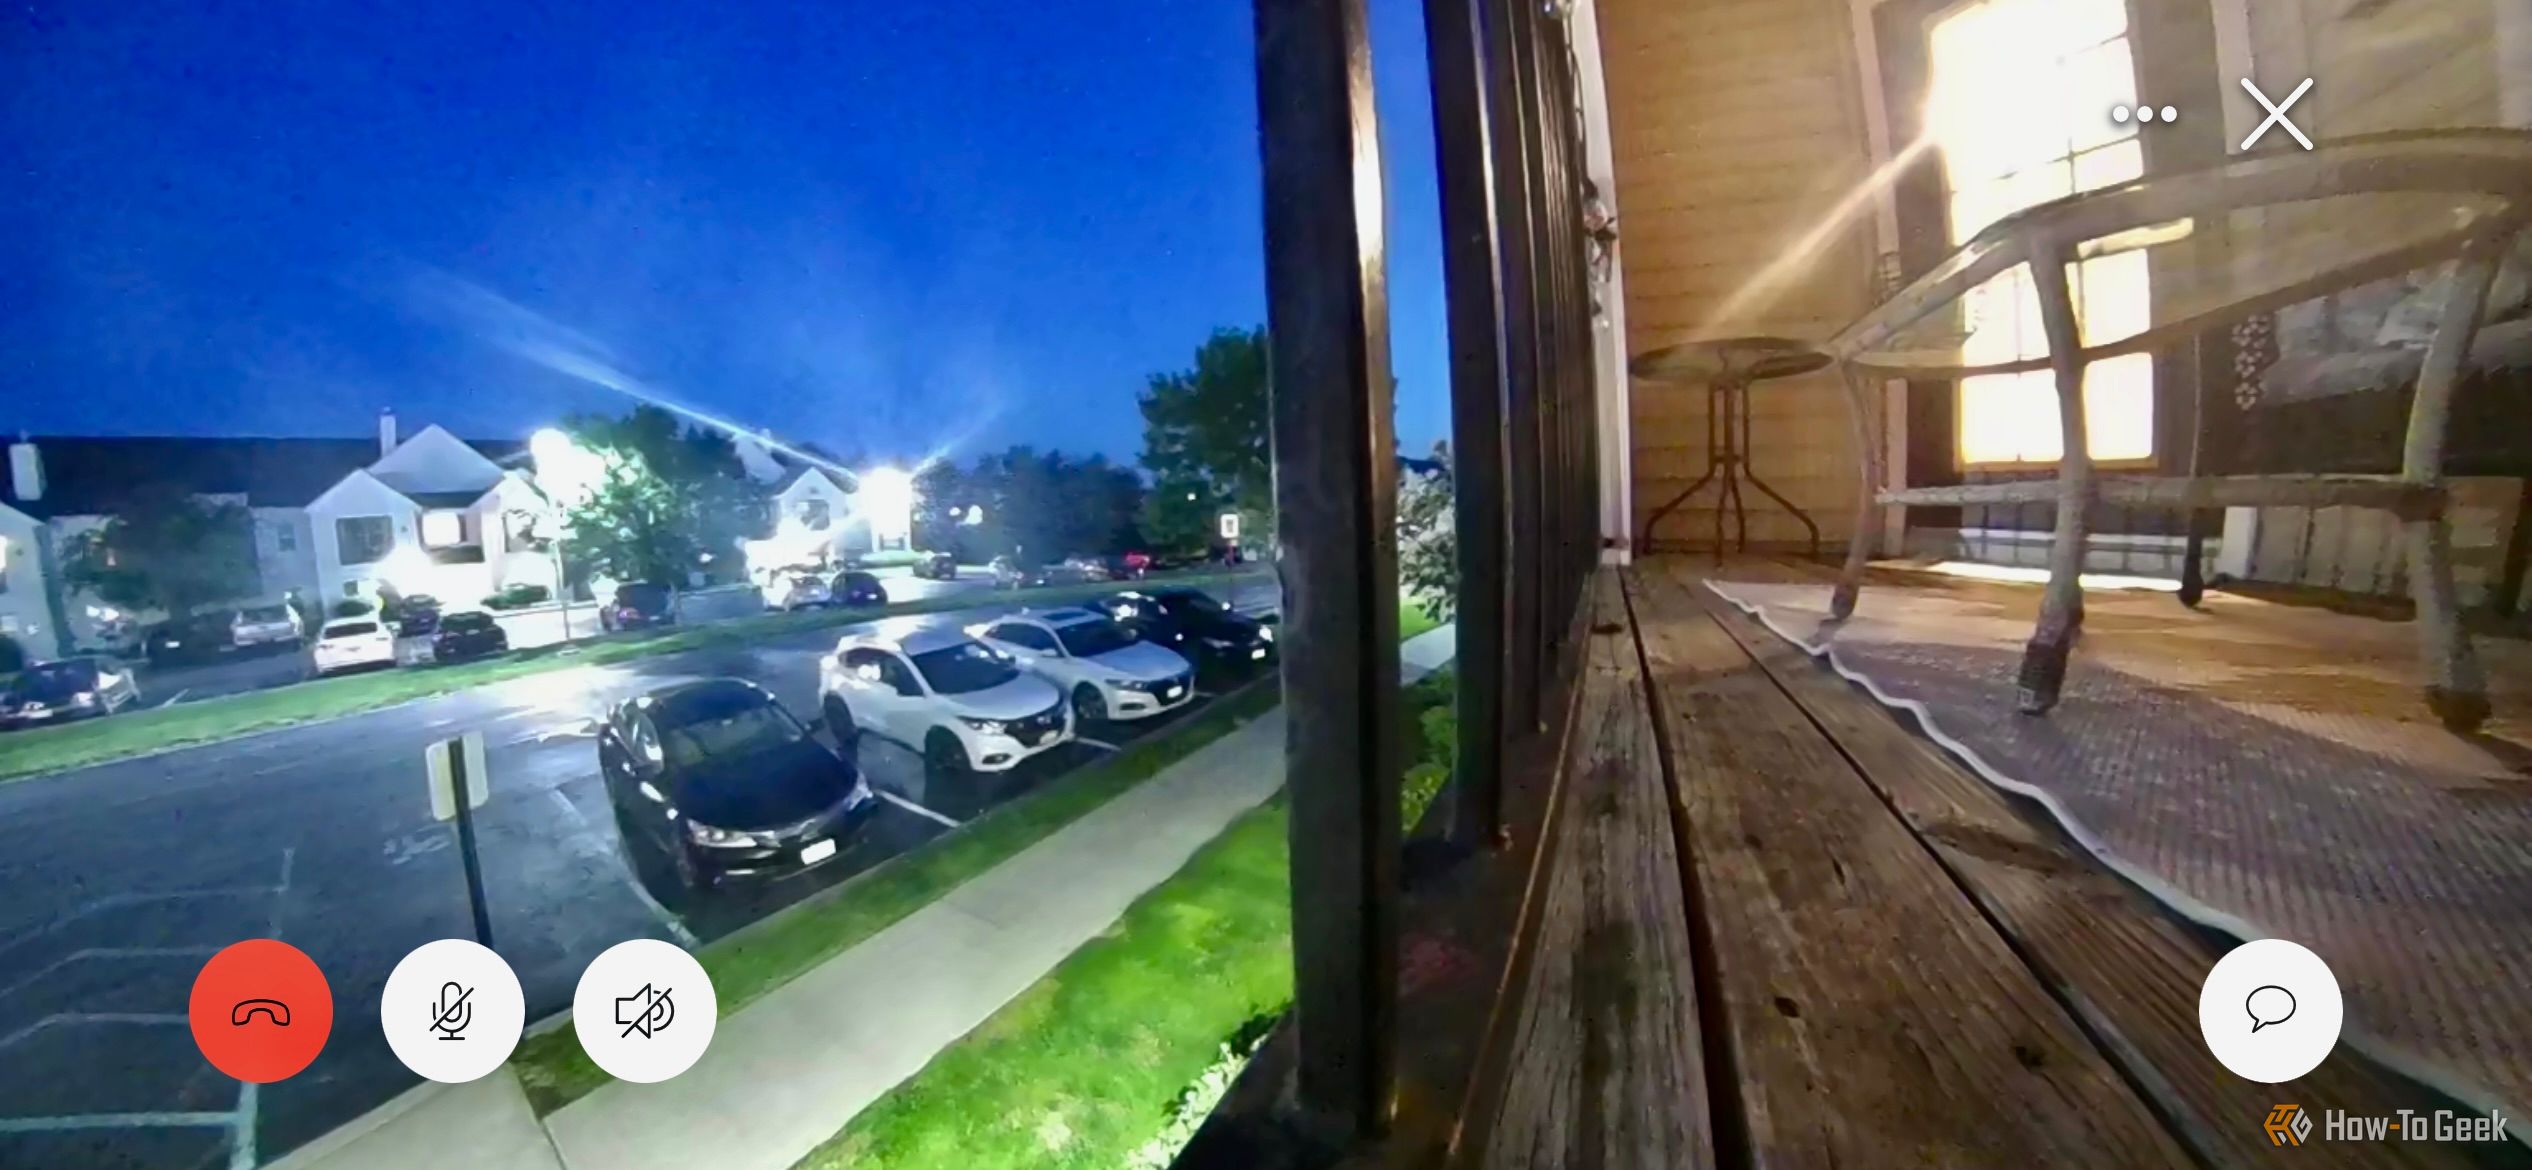 The Ring Battery Doorbell Pro's night footage